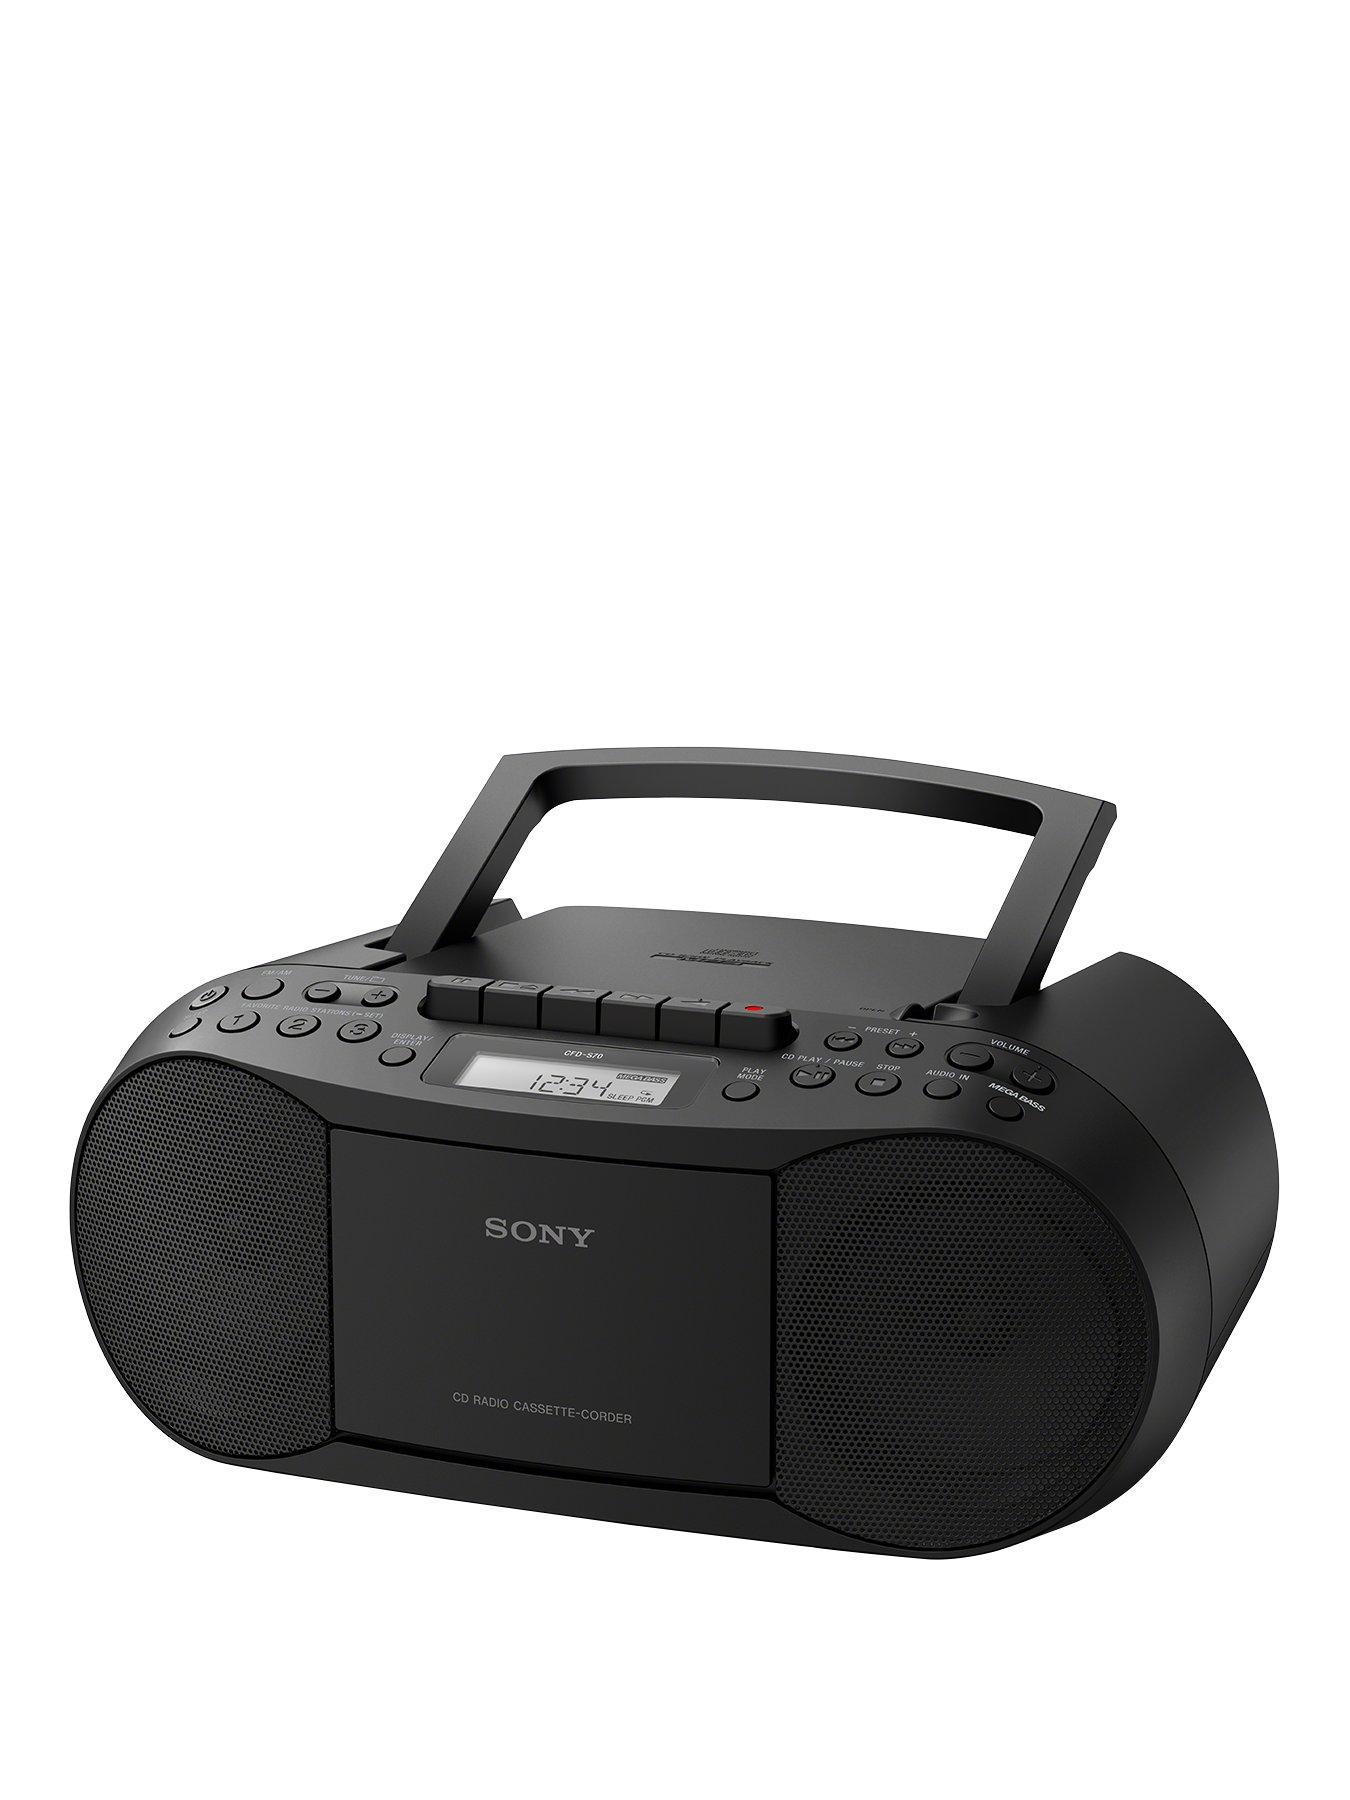 Sony CFD-S70 Portable CD Radio Cassette Player - Black 